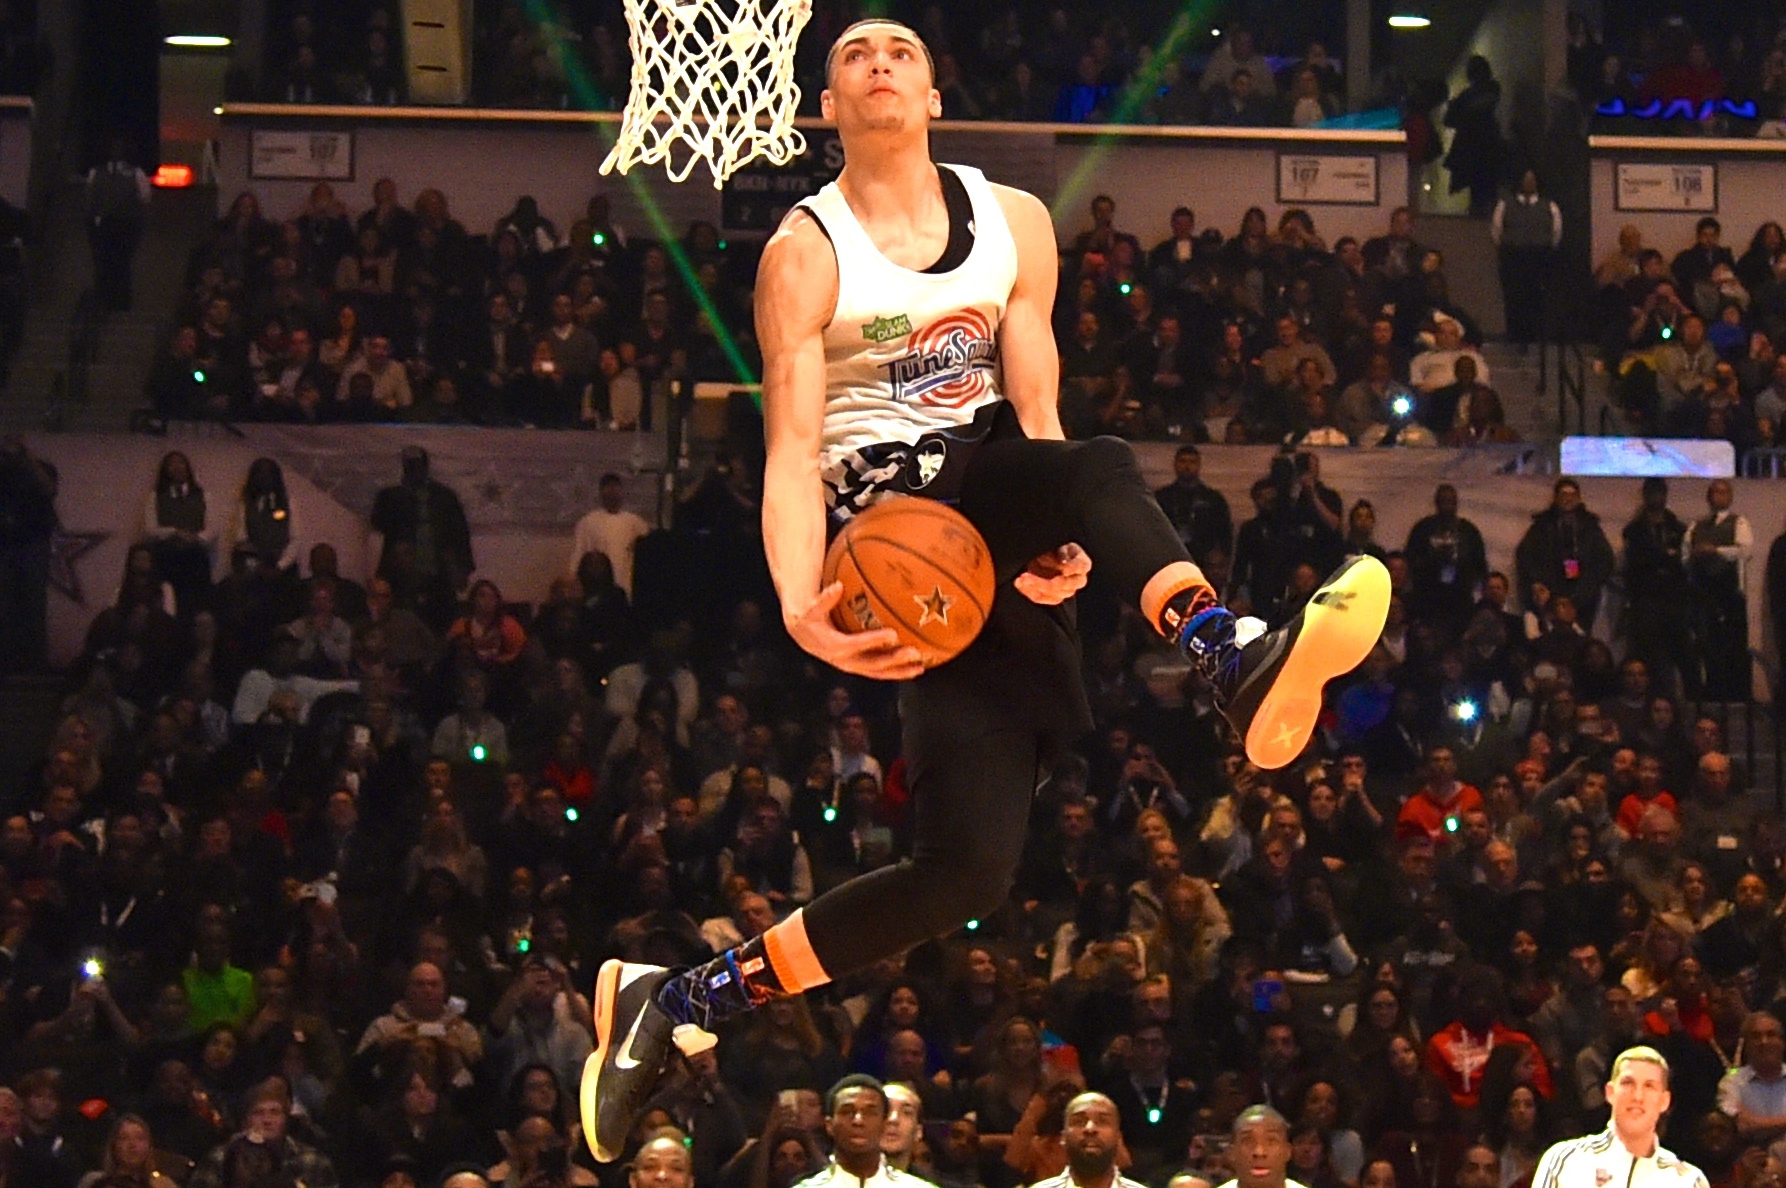 NBA litness test: The case for an all-rookie Slam Dunk contest